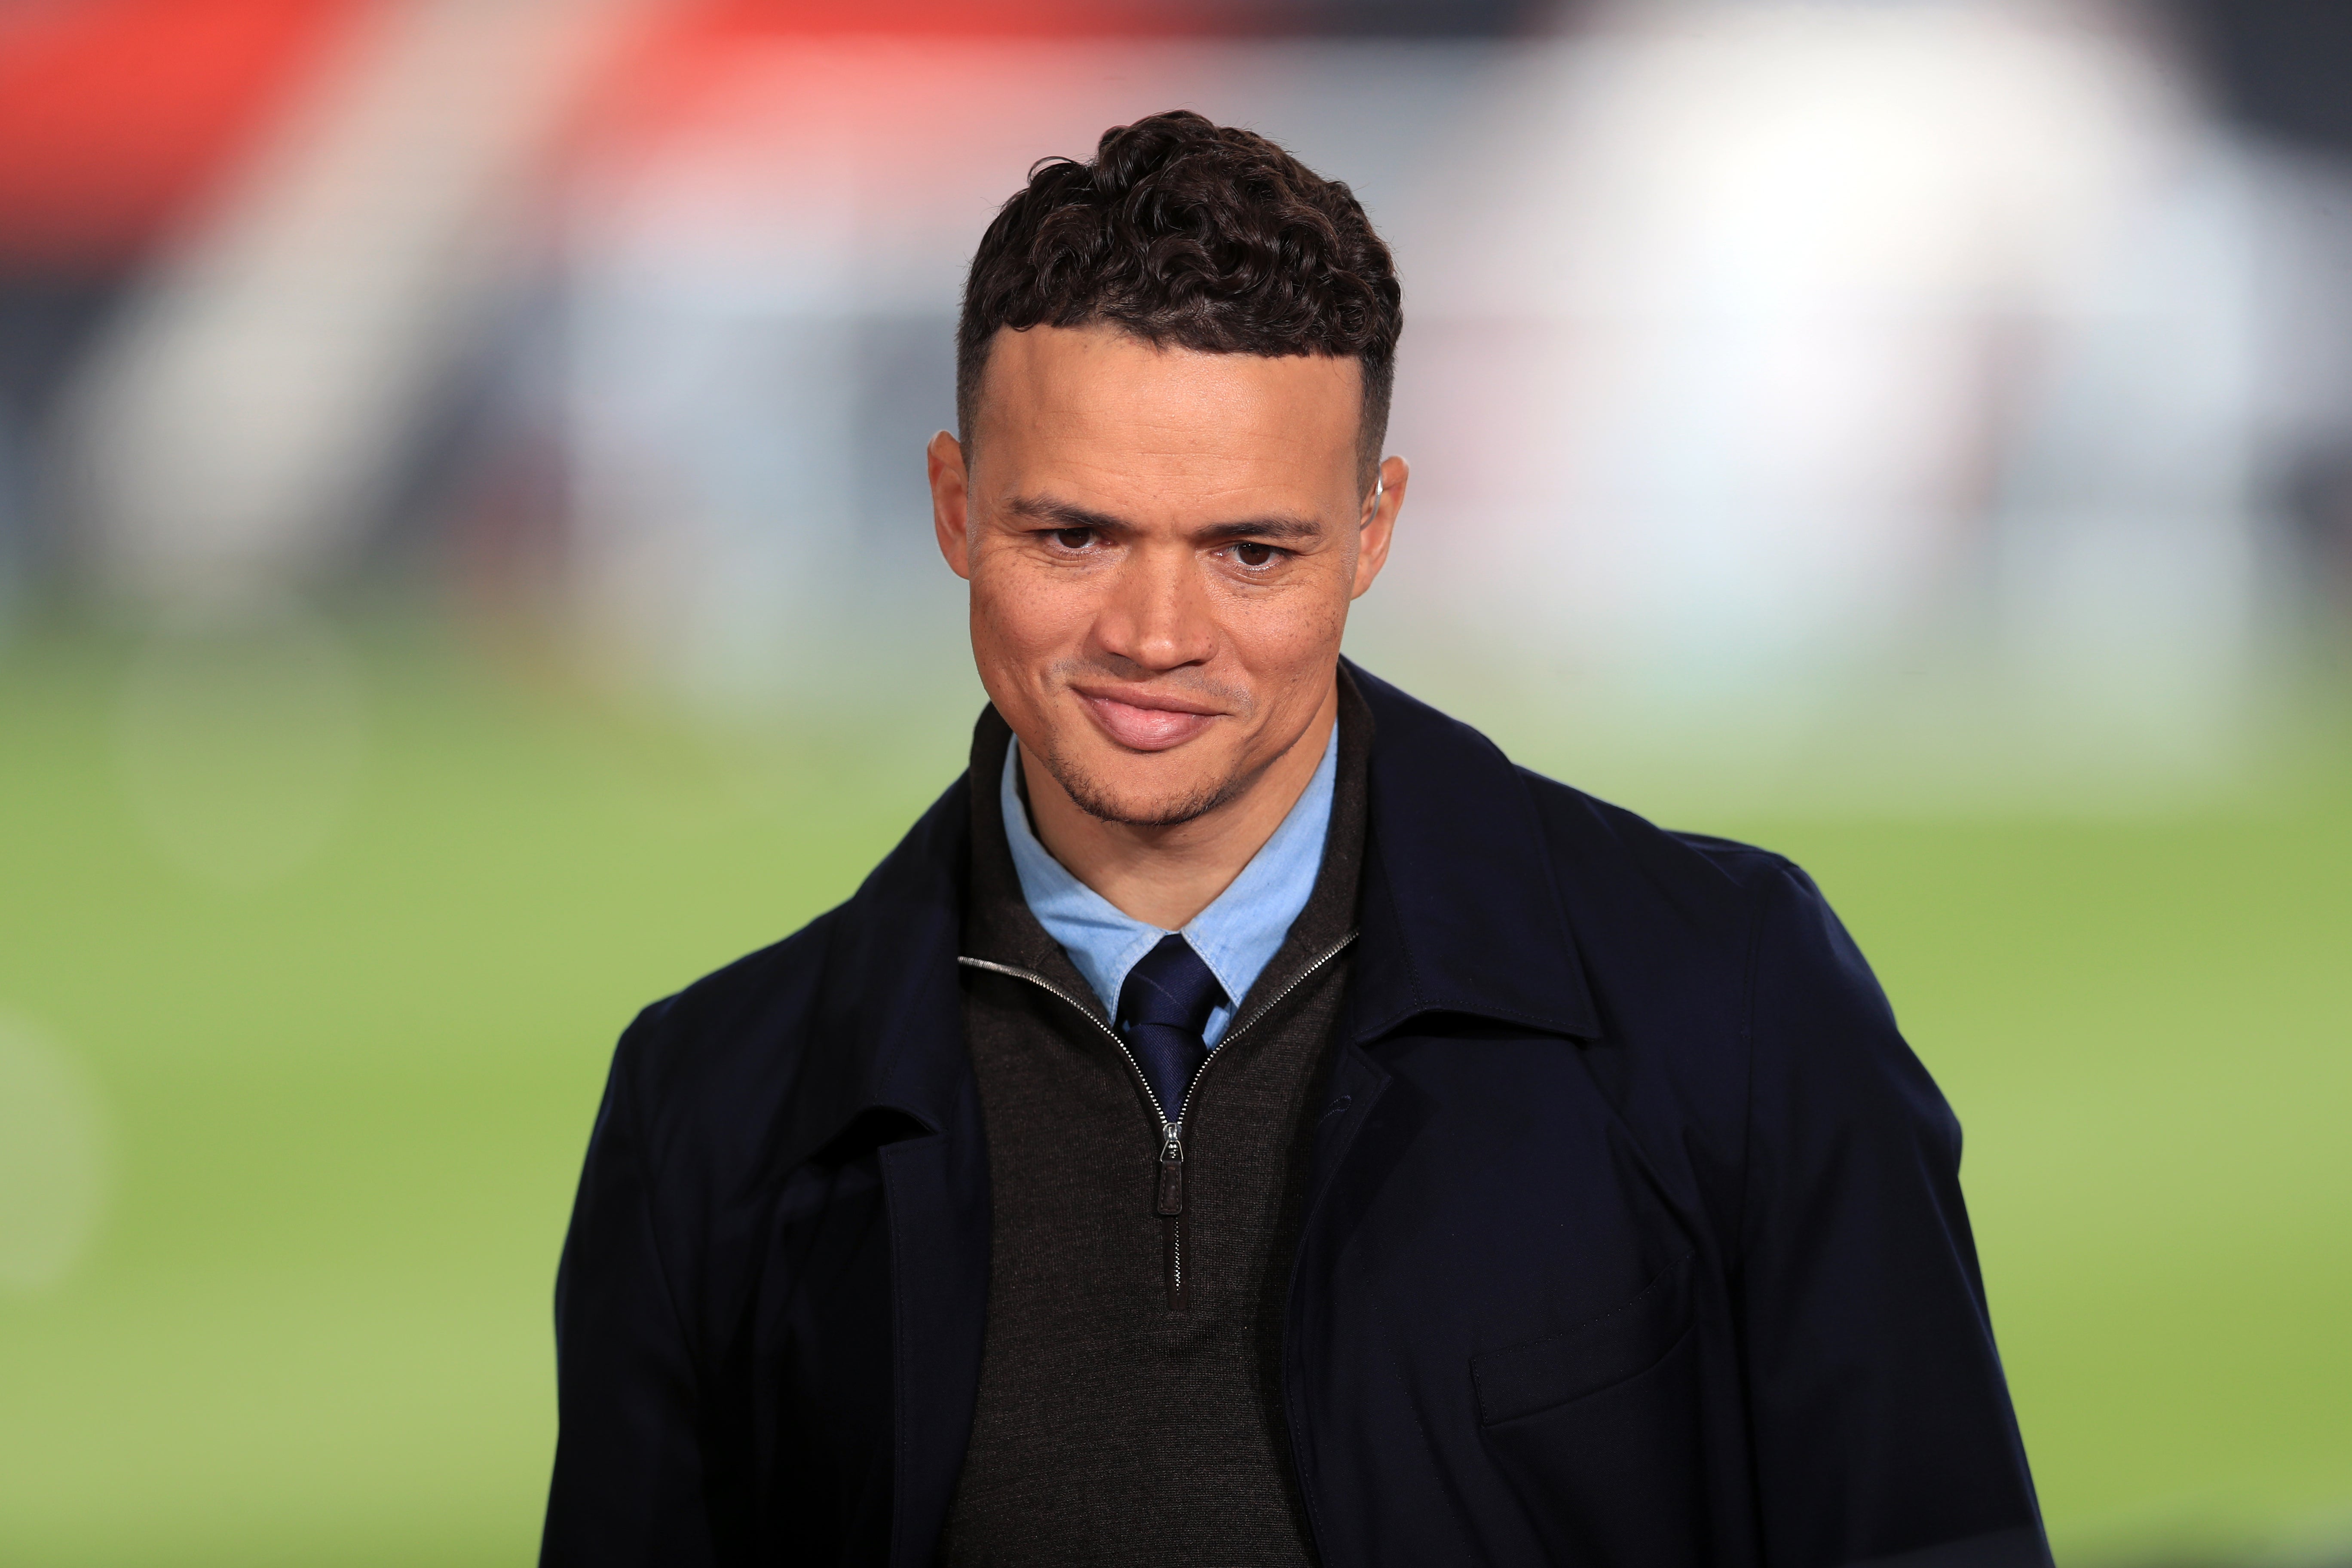 Jermaine Jenas will appear in court over the October 2021 incident